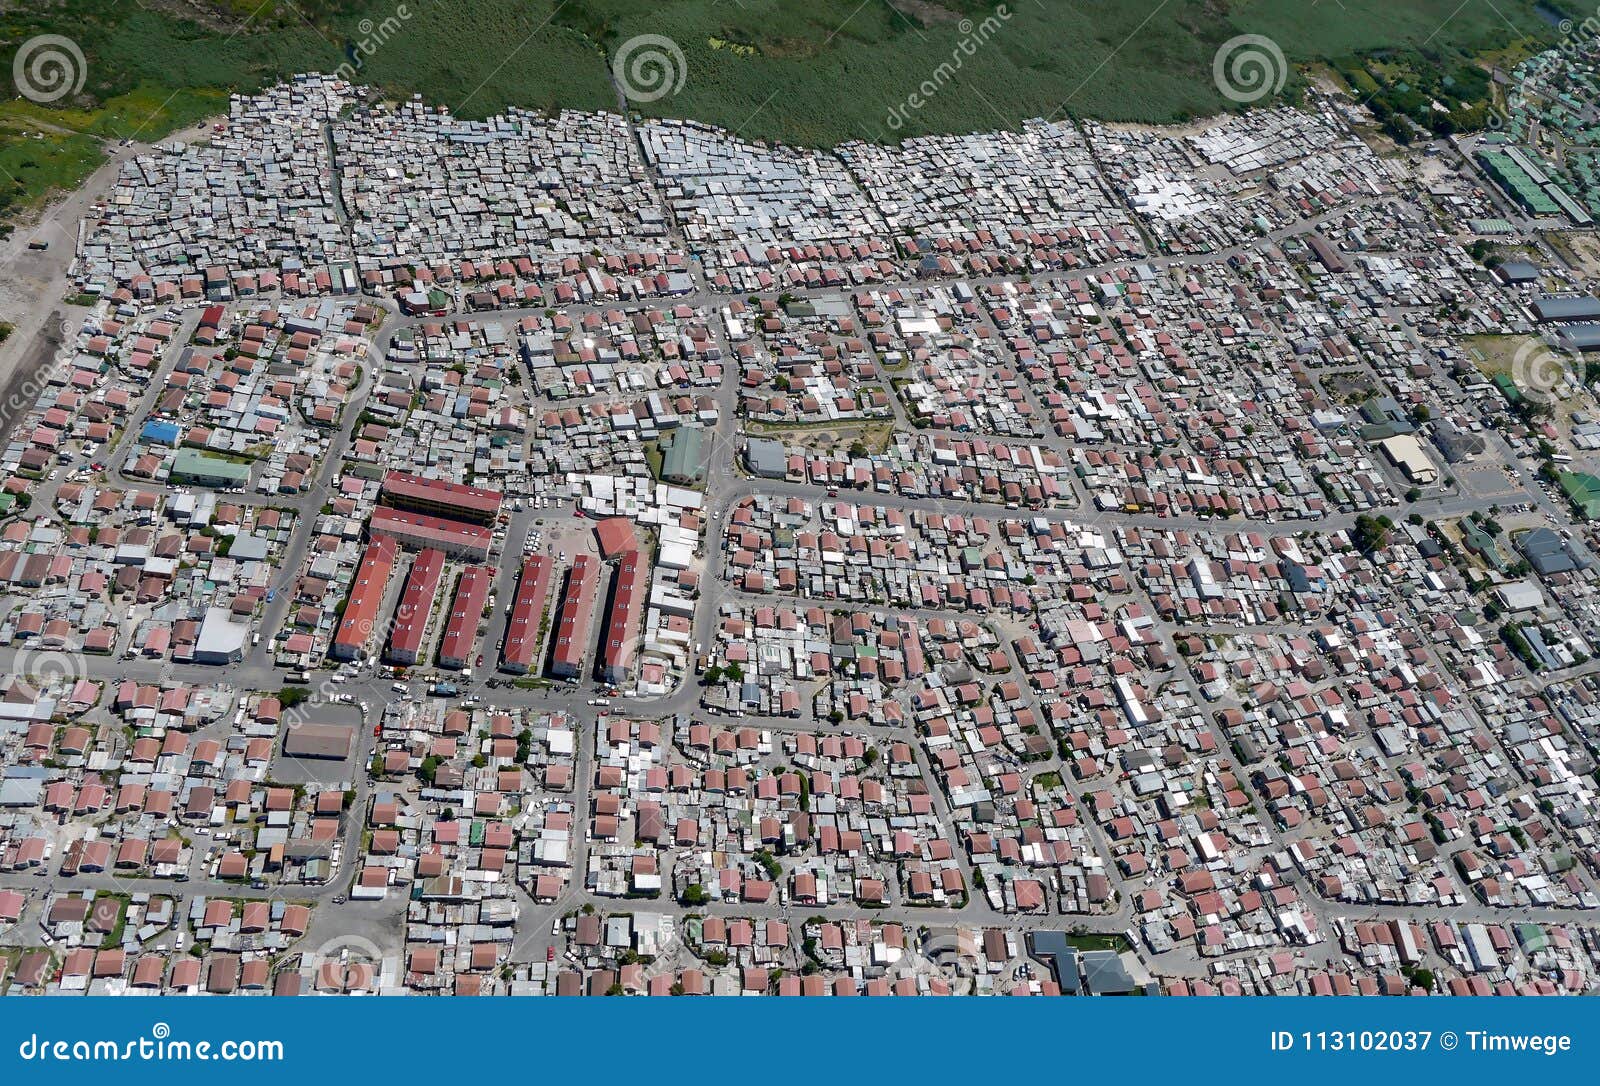 densely populated township in south africa, from above